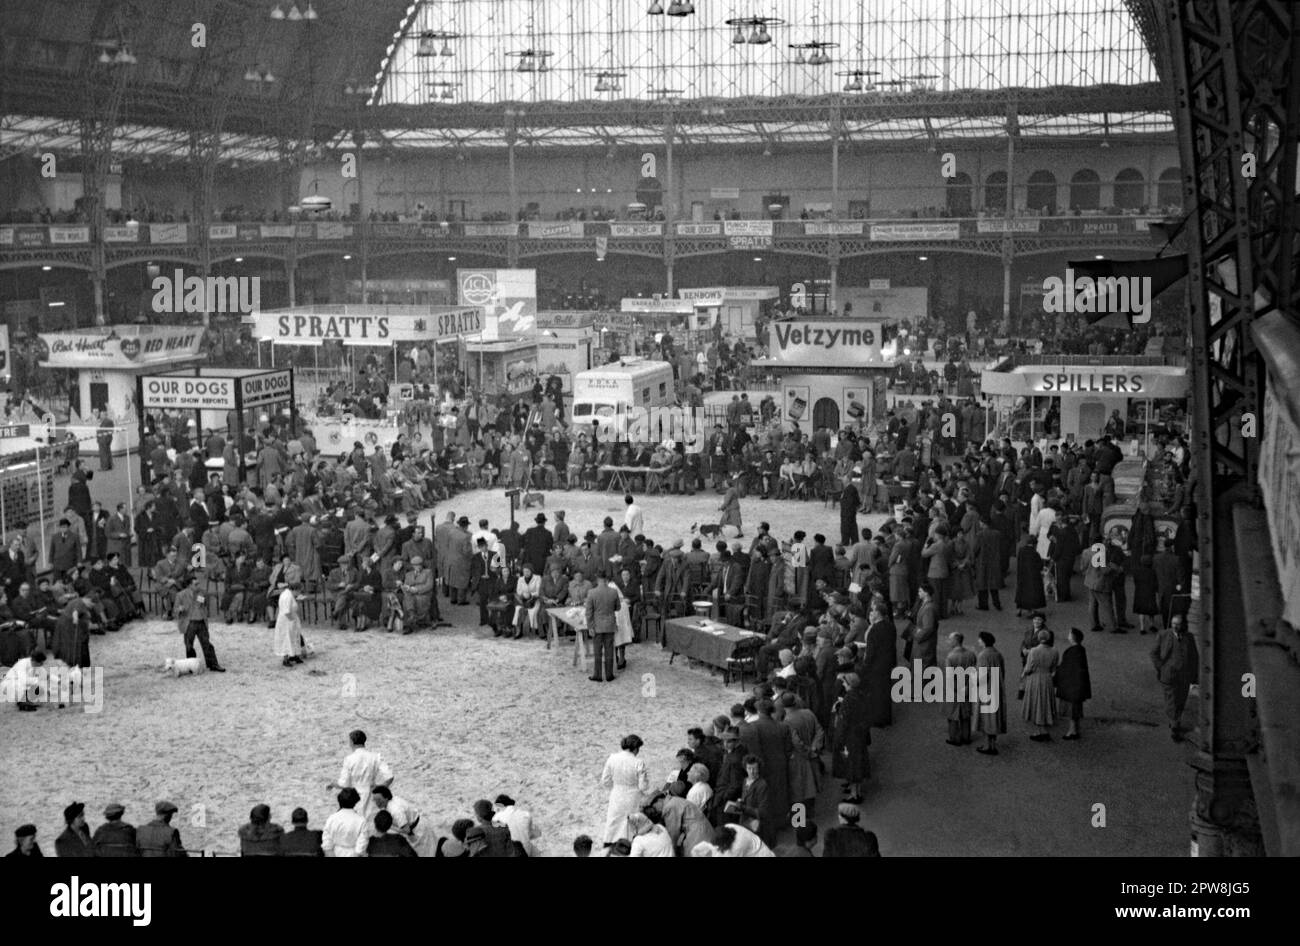 Crufts dog show in main hall at Olympia Exhibition Centre, London, England, UK c. 1950. Crufts is an annual international dog show, first held in 1891. Dogs are being judged (left). Stands on the floor promote Spratts, Spillers and Vetzyme products. Organised by The Kennel Club, it is the largest show in the world. It is a championship conformation show for dogs, a large trade show of goods and services, plus competitions. The 1948 show was the first to be held at this venue. This image is from an old amateur 35mm negative – a vintage 1940s/50s photograph. Stock Photo